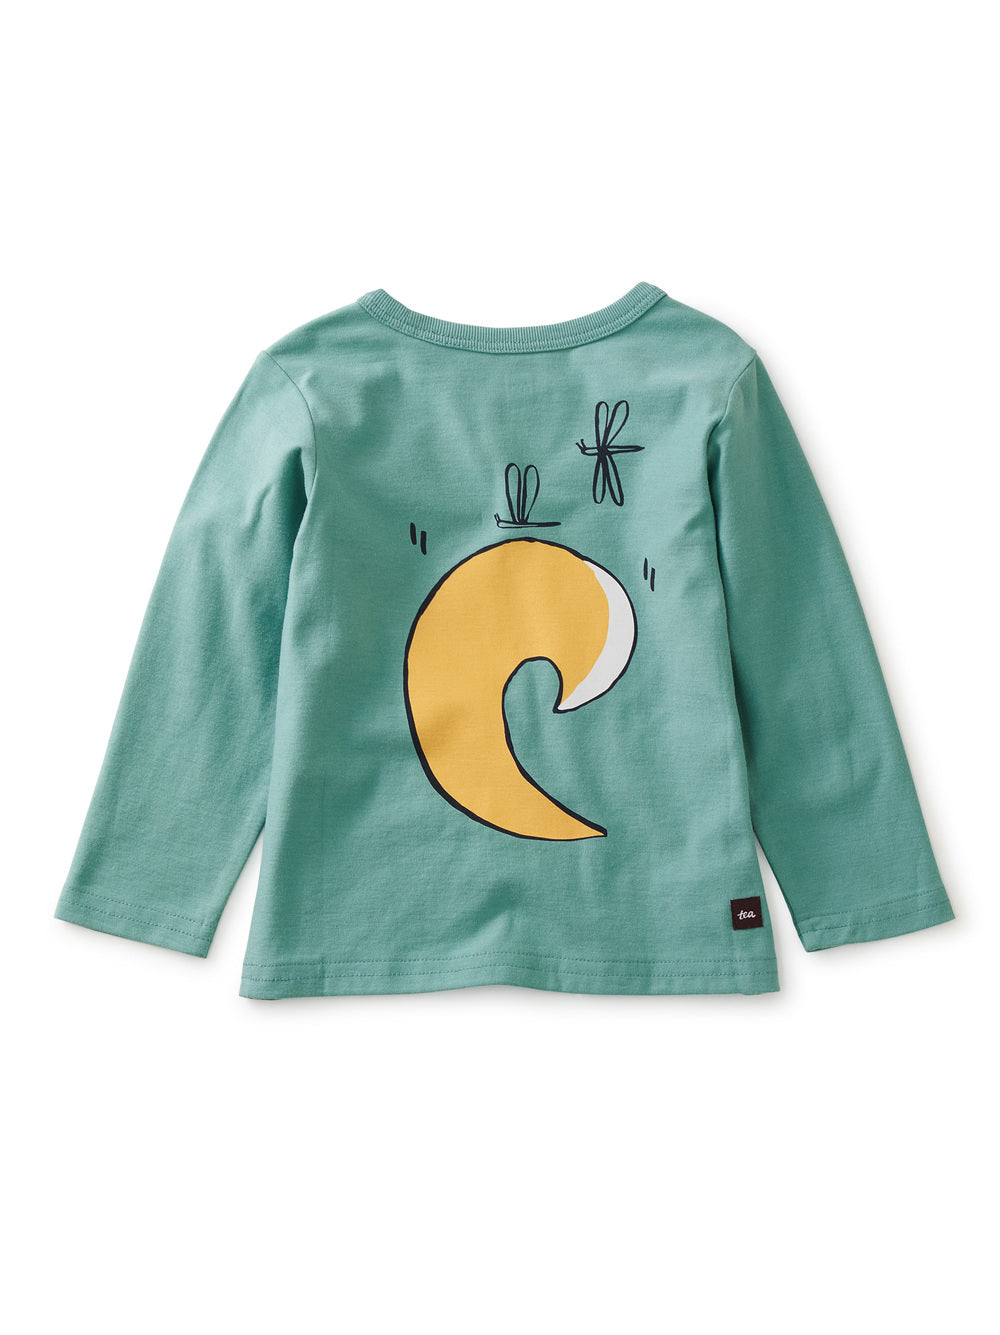 Tee (Long Sleeve) - Shiba Inu (Baby & Toddler Only)